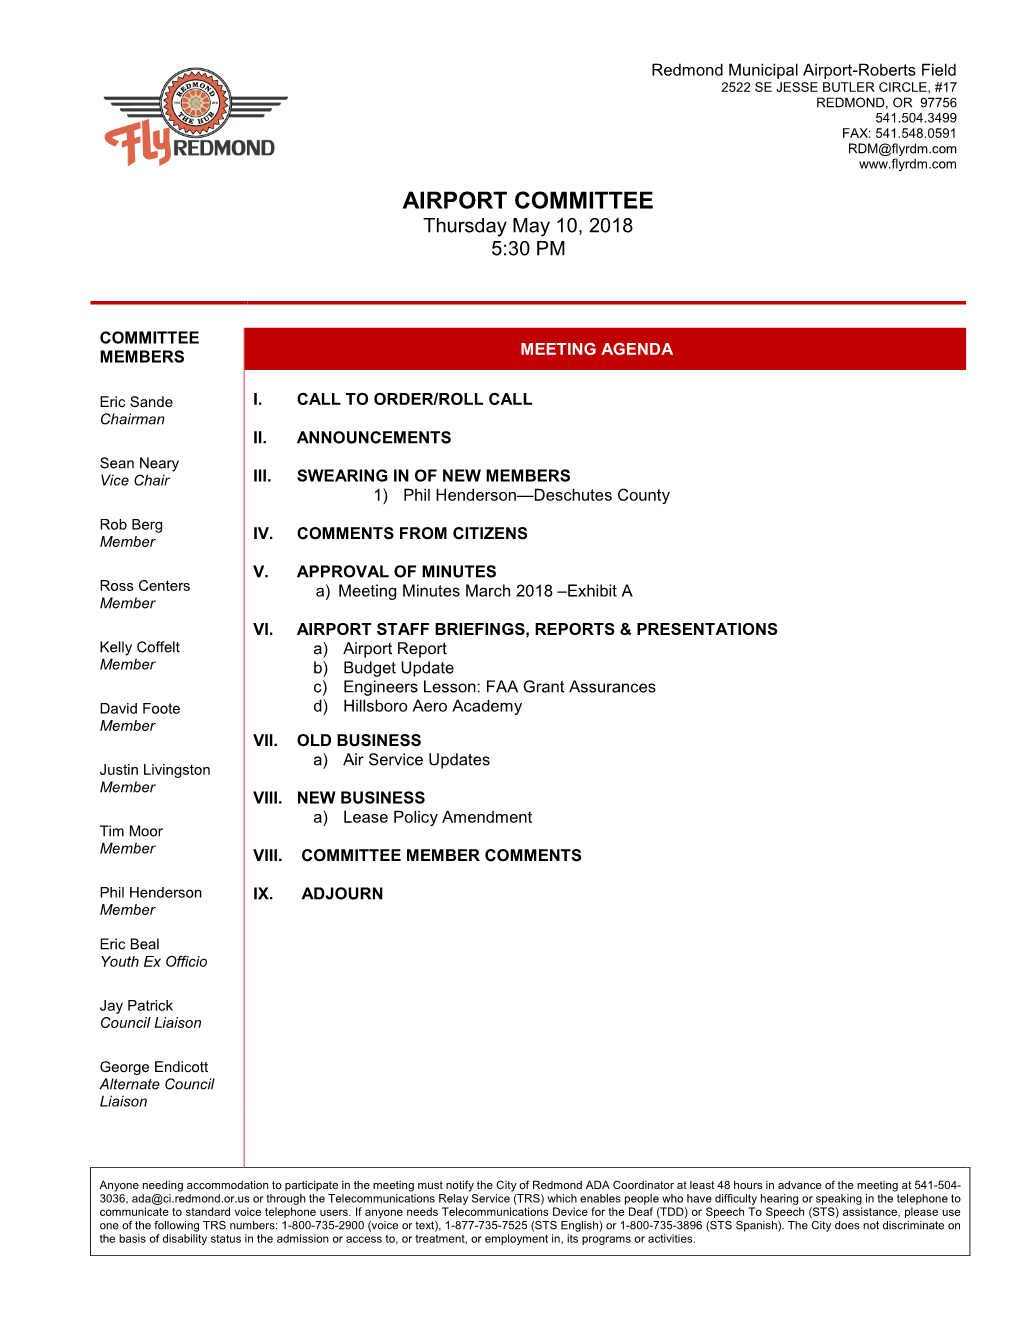 AIRPORT COMMITTEE Thursday May 10, 2018 5:30 PM